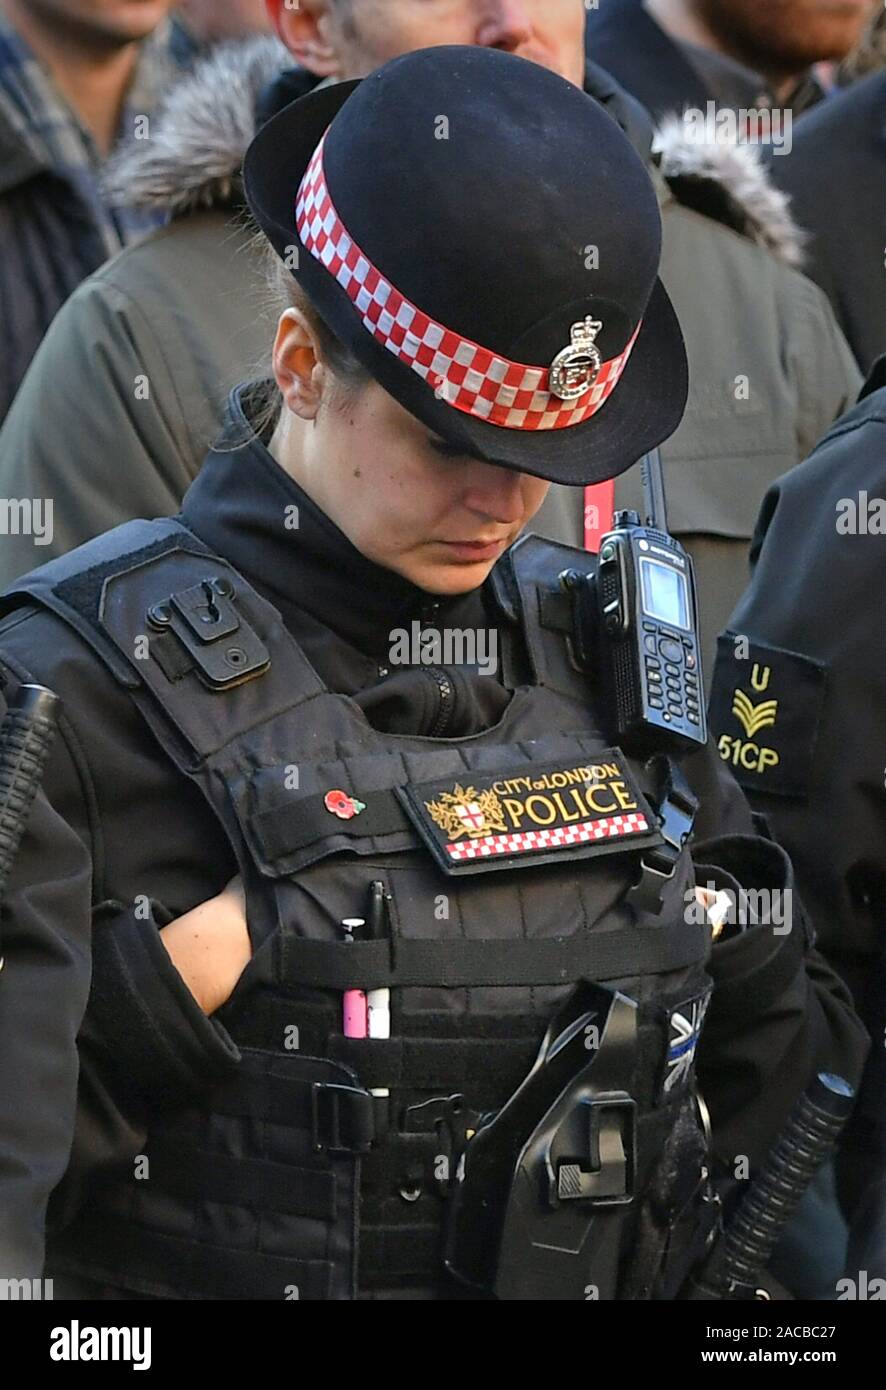 Police officers at a vigil in Guildhall Yard, London, to honour the victims off the London Bridge terror attack, as well as the members of the public and emergency services who risked their lives to help others after a terrorist wearing a fake suicide vest went on a knife rampage killing two people, was shot dead by police on Friday. Stock Photo